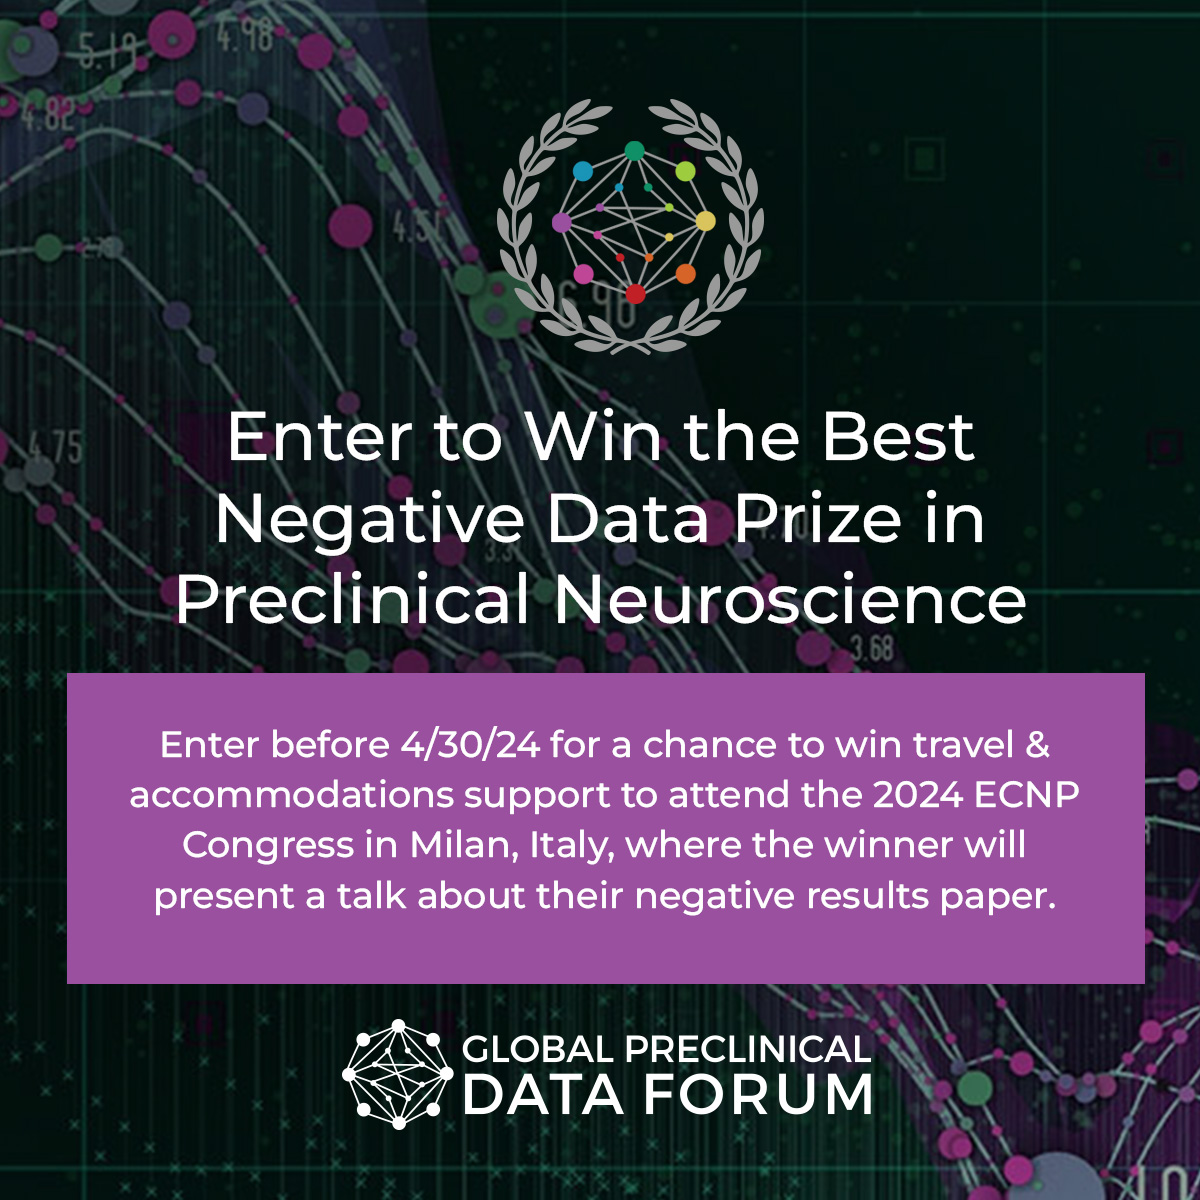 Attention preclinical neuroscience researchers! Submit your work for a chance to win the 2024 Best Negative Data Prize. @PreclinicalData & @ECNP. preclinicaldataforum.org/negative-prize/ #preclinicalresearch #neuroscience #openscience